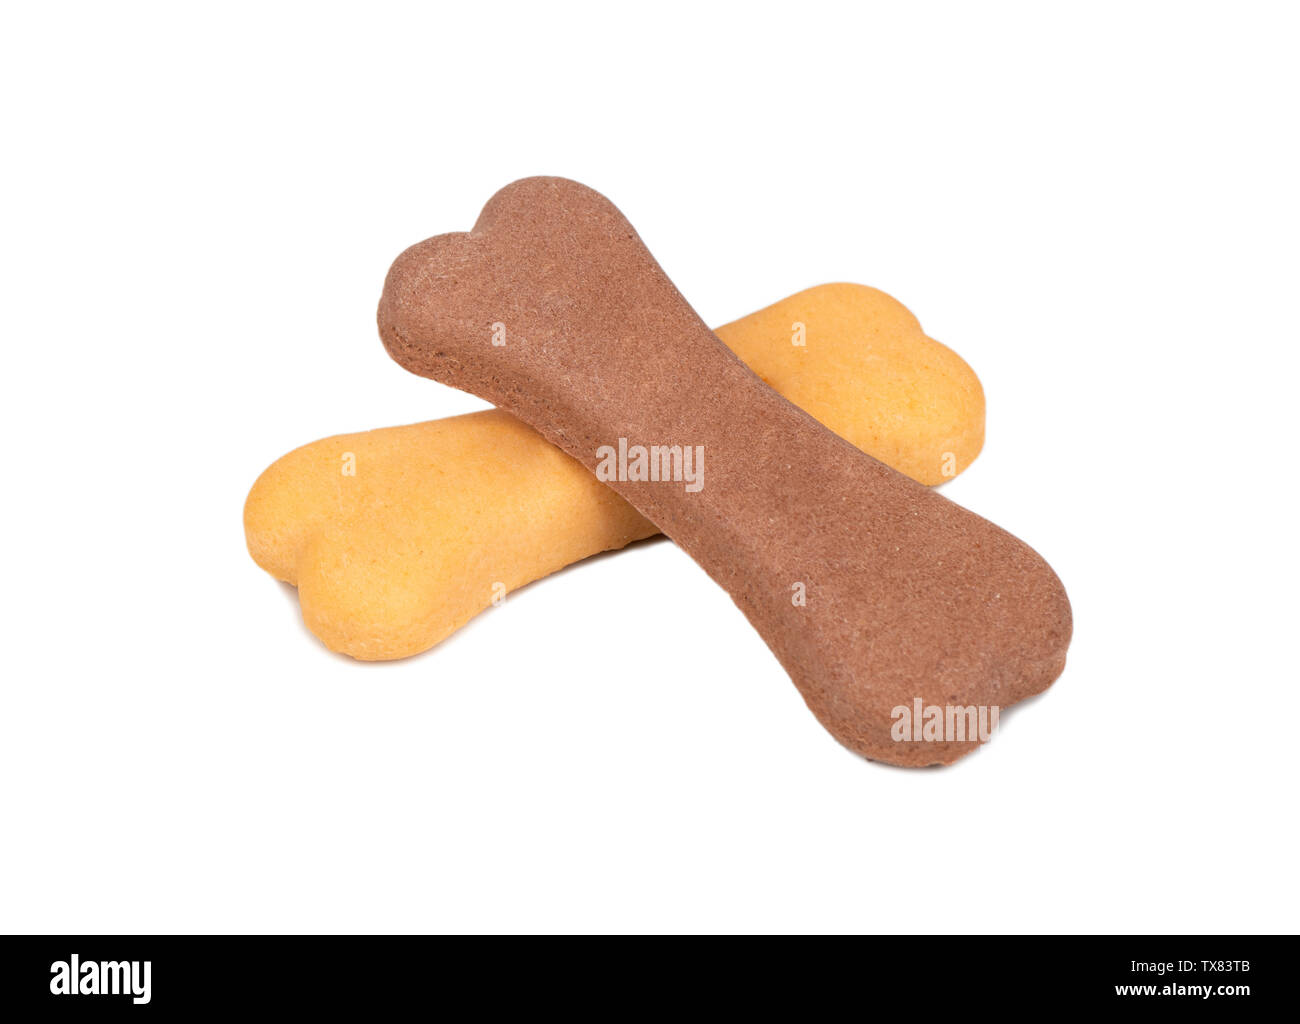 Dog biscuits in bone shape isolated on white background Stock Photo